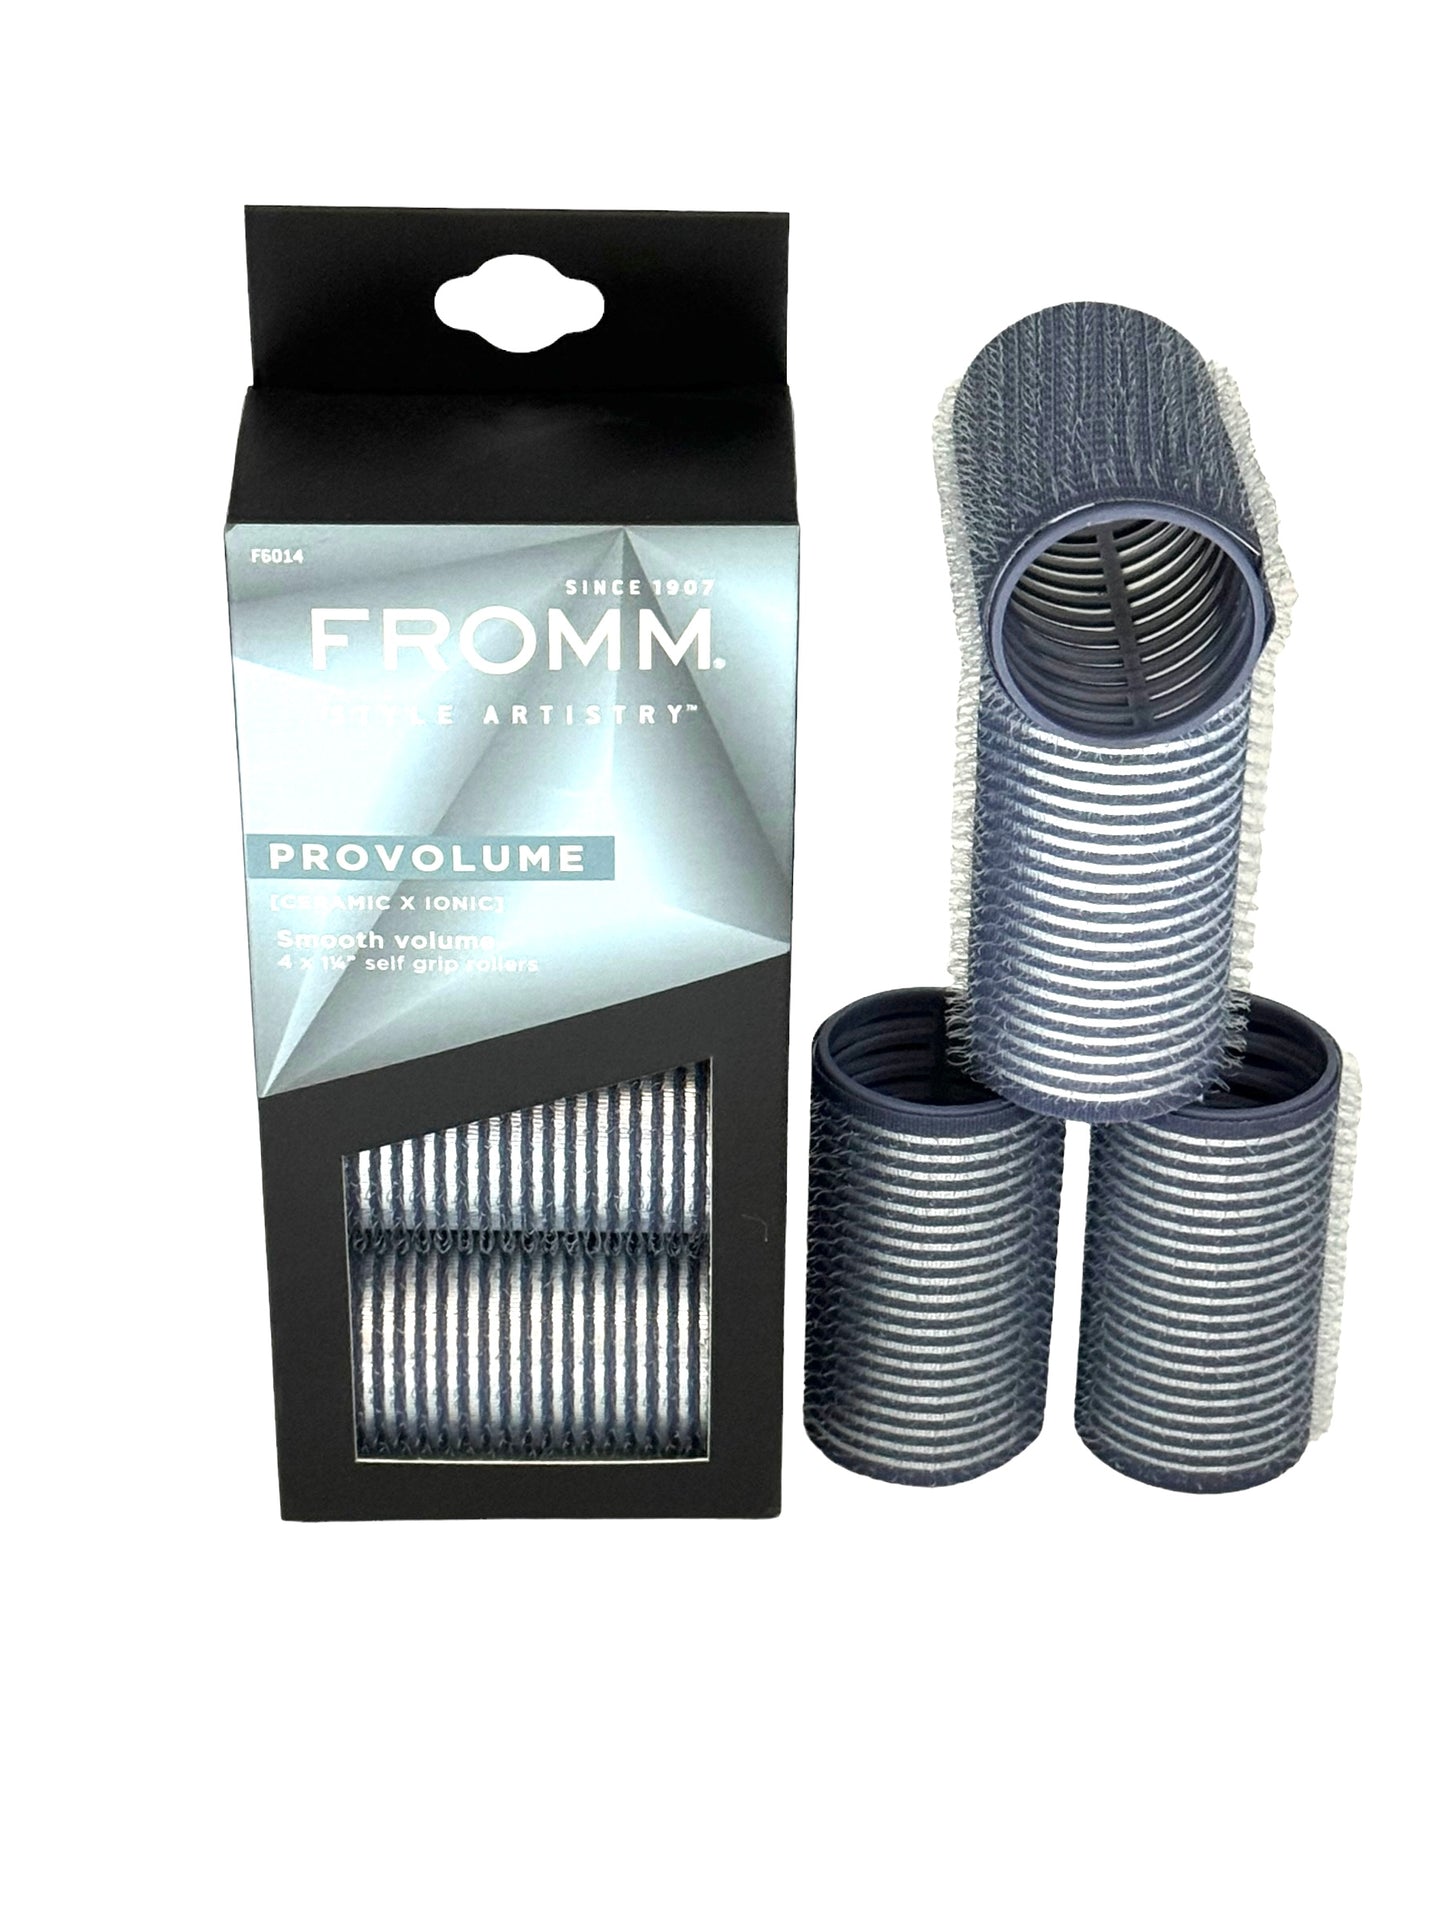 Fromm Pro Volume Ceramic Ionic Hair Rollers Self Grip Variants